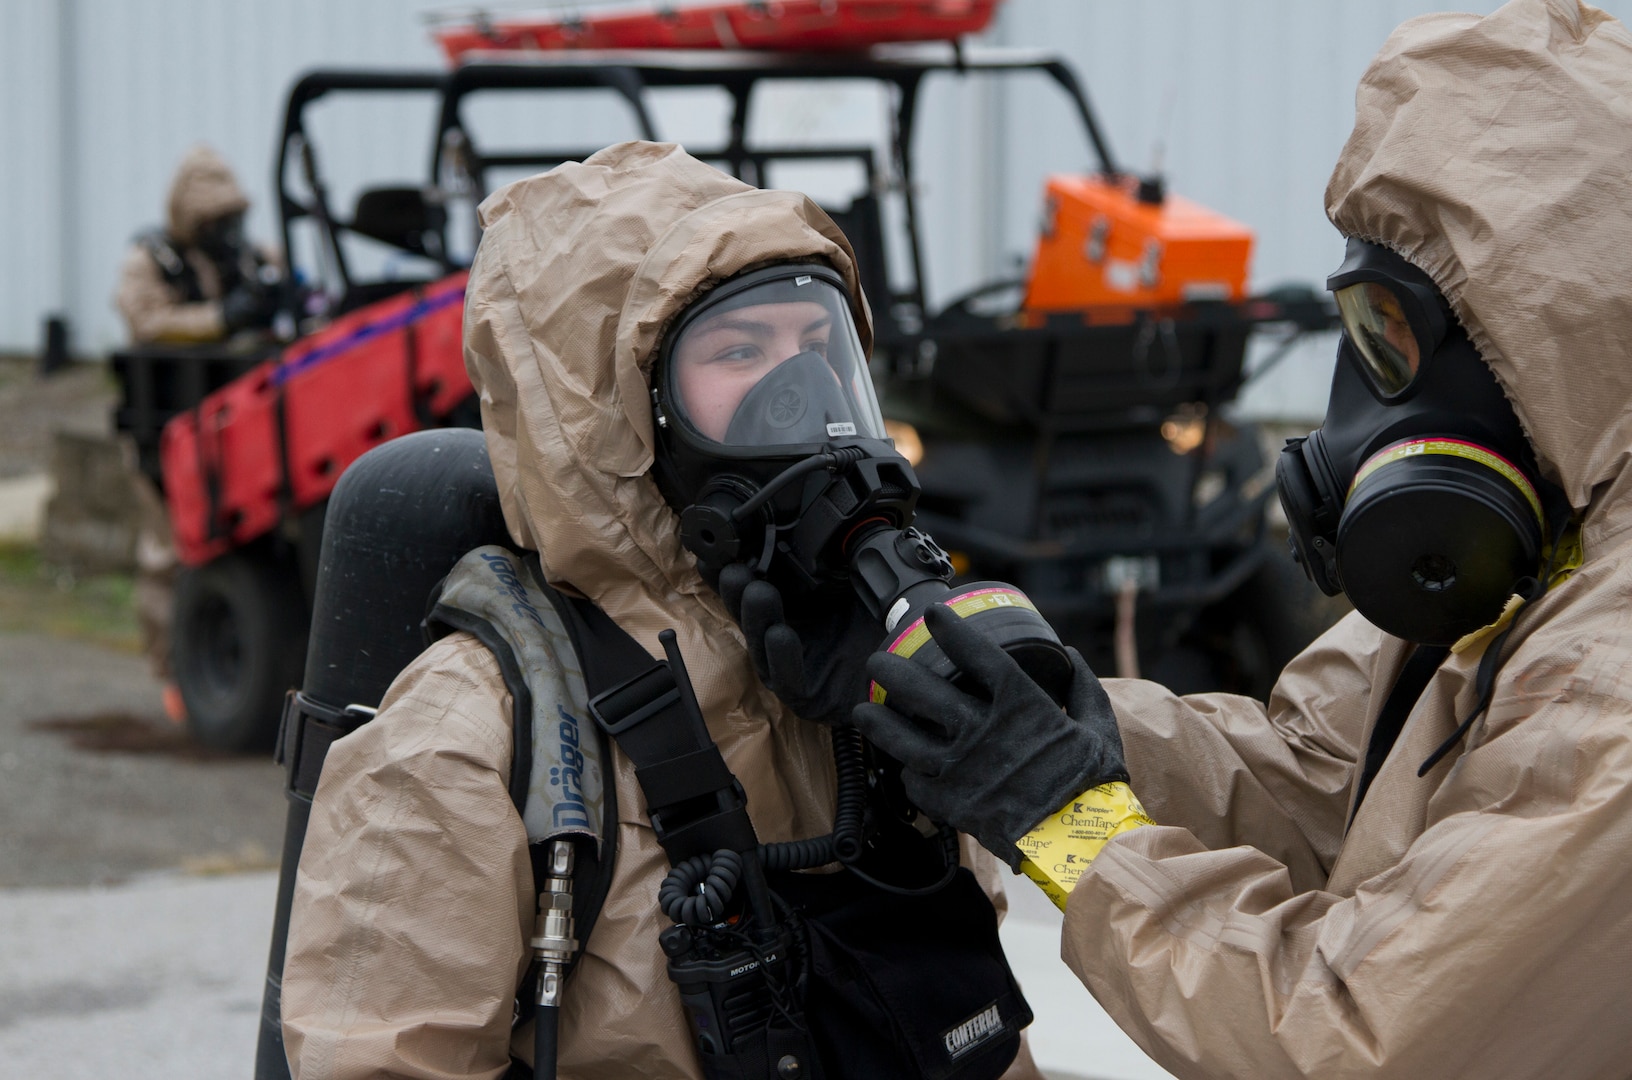 Sgt. Karlee Jones waits for her gas mask to be removed on October 28, 2020 at The Central Missouri Events Center in Columbia, Missouri. Sgt. Jones finished a training exercise involving a biological threat.